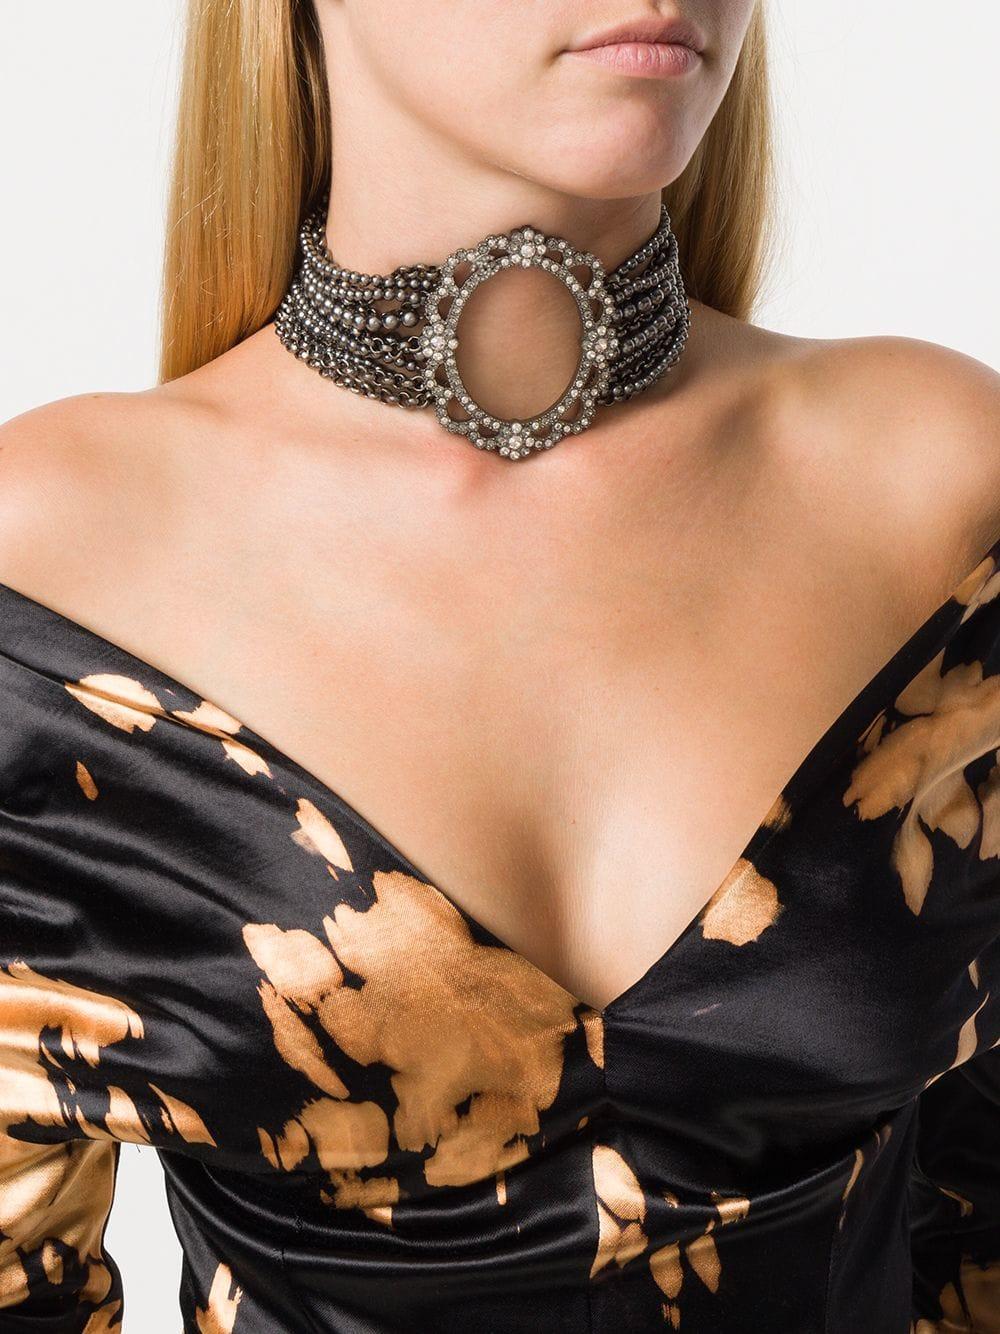 The Chanel silver-tone choker necklace is part of 2015s Chanel collection. With lobster clasp closure and hanging logo details.  Layered beads and silver-tone chains and the crystal oval design embellished on the front, show the elegance of this